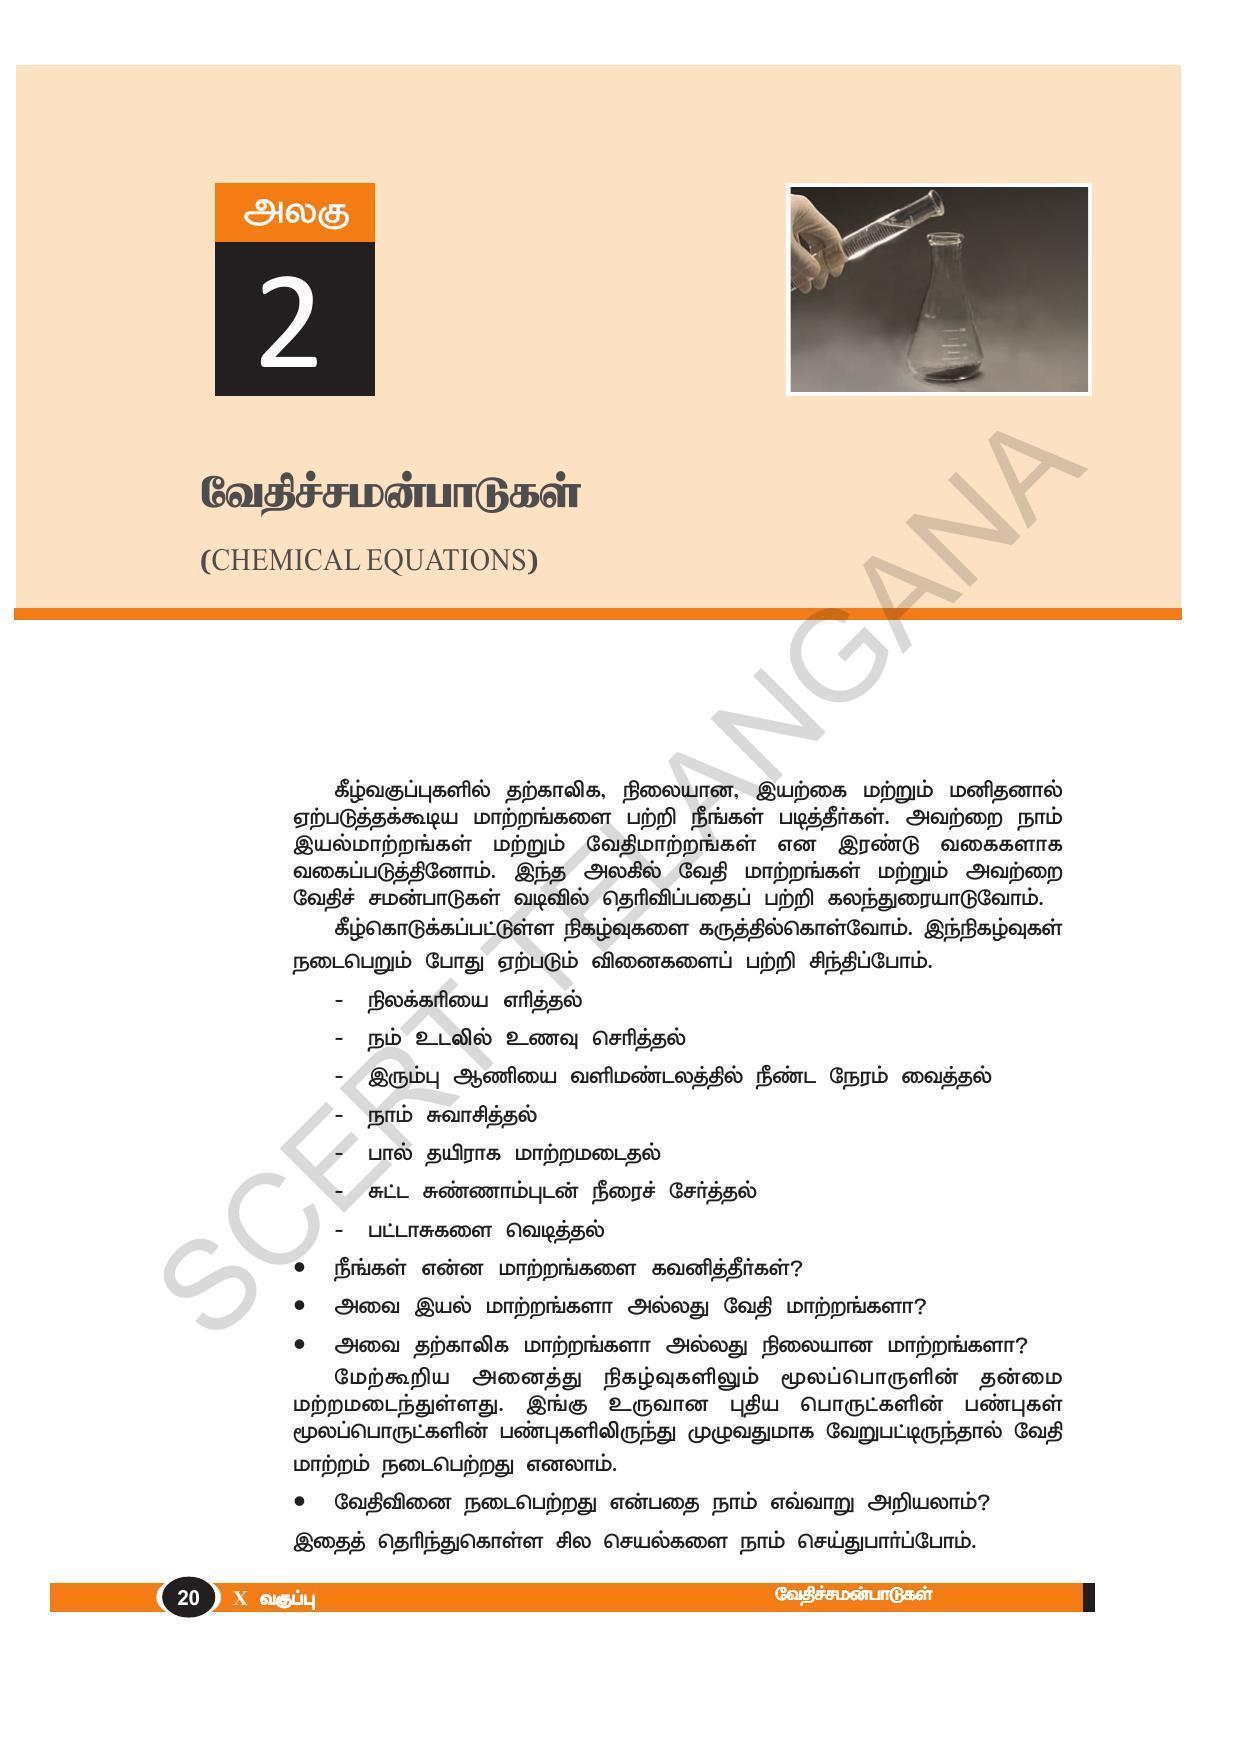 TS SCERT Class 10 Physical Science(Tamil Medium) Text Book - Page 32